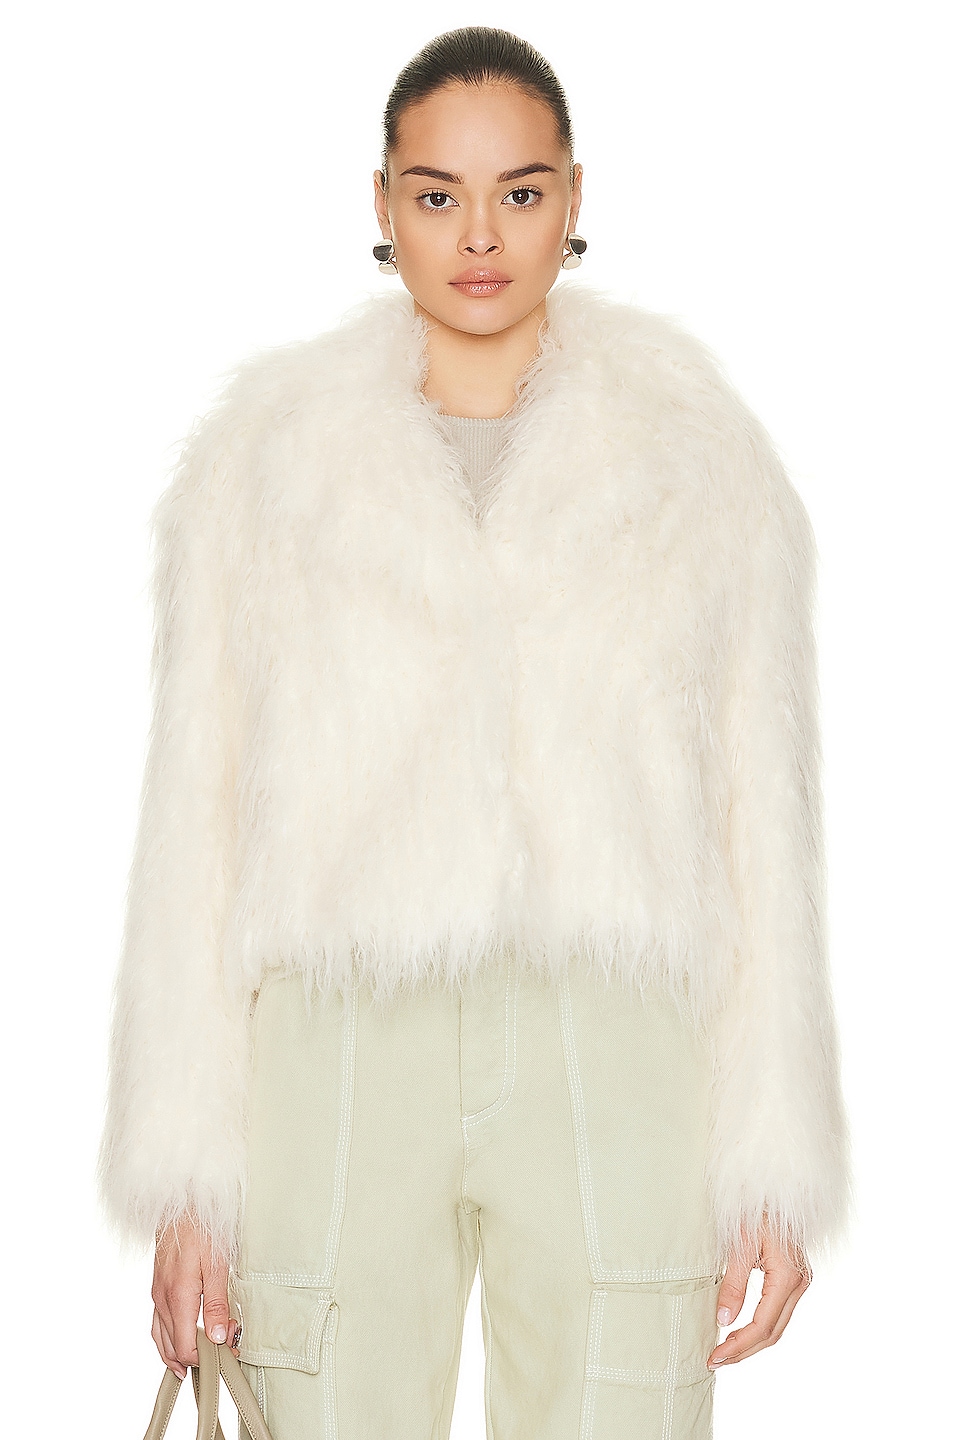 STAND STUDIO Janet Faux Fur Jacket in White | FWRD